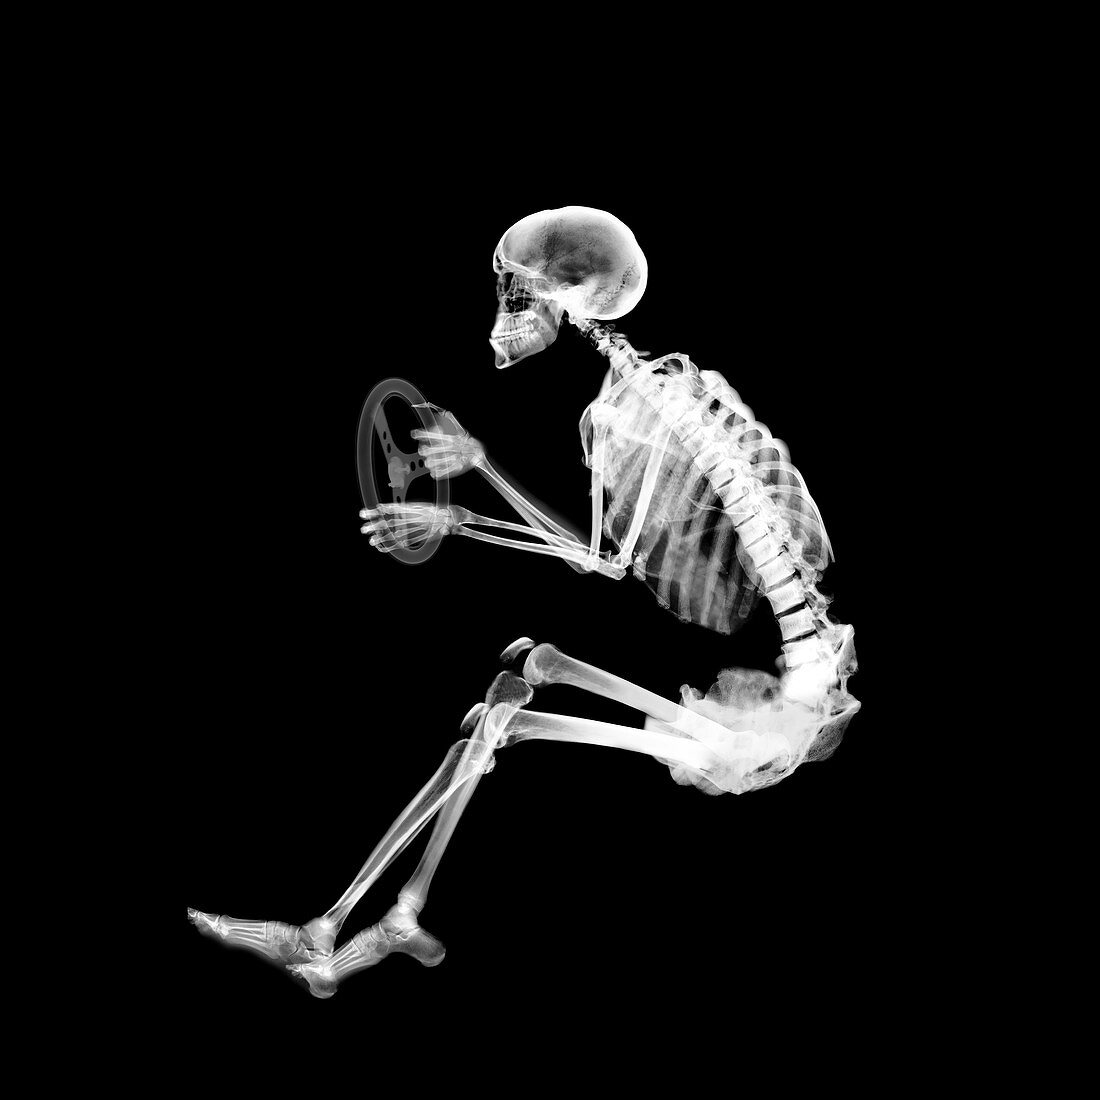 Skeleton in driving position, X-ray